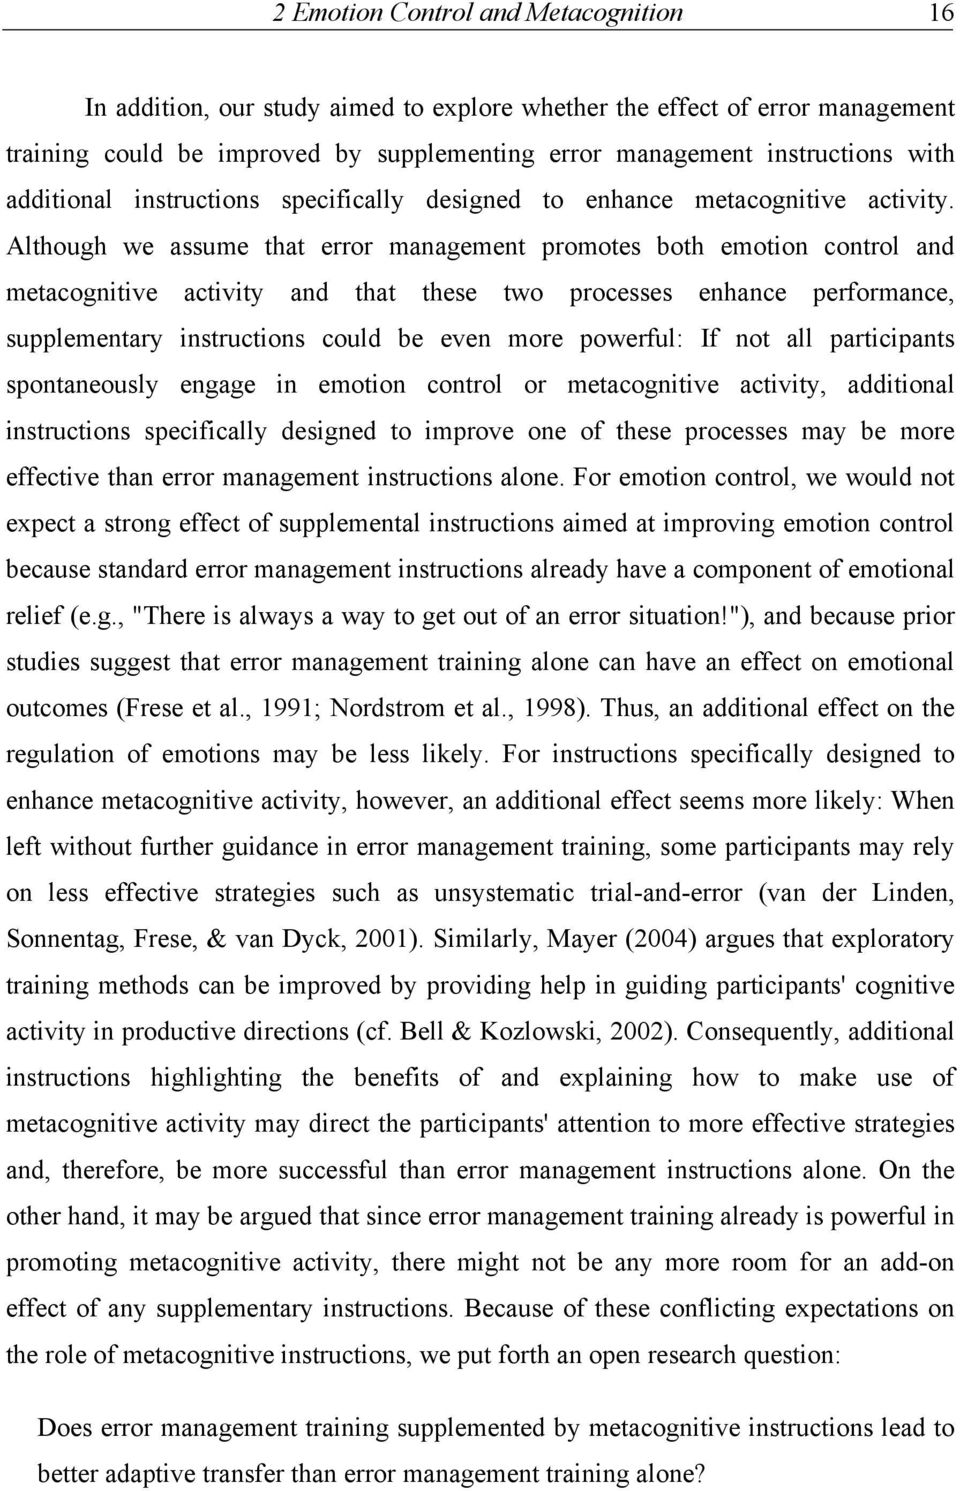 Although we assume that error management promotes both emotion control and metacognitive activity and that these two processes enhance performance, supplementary instructions could be even more